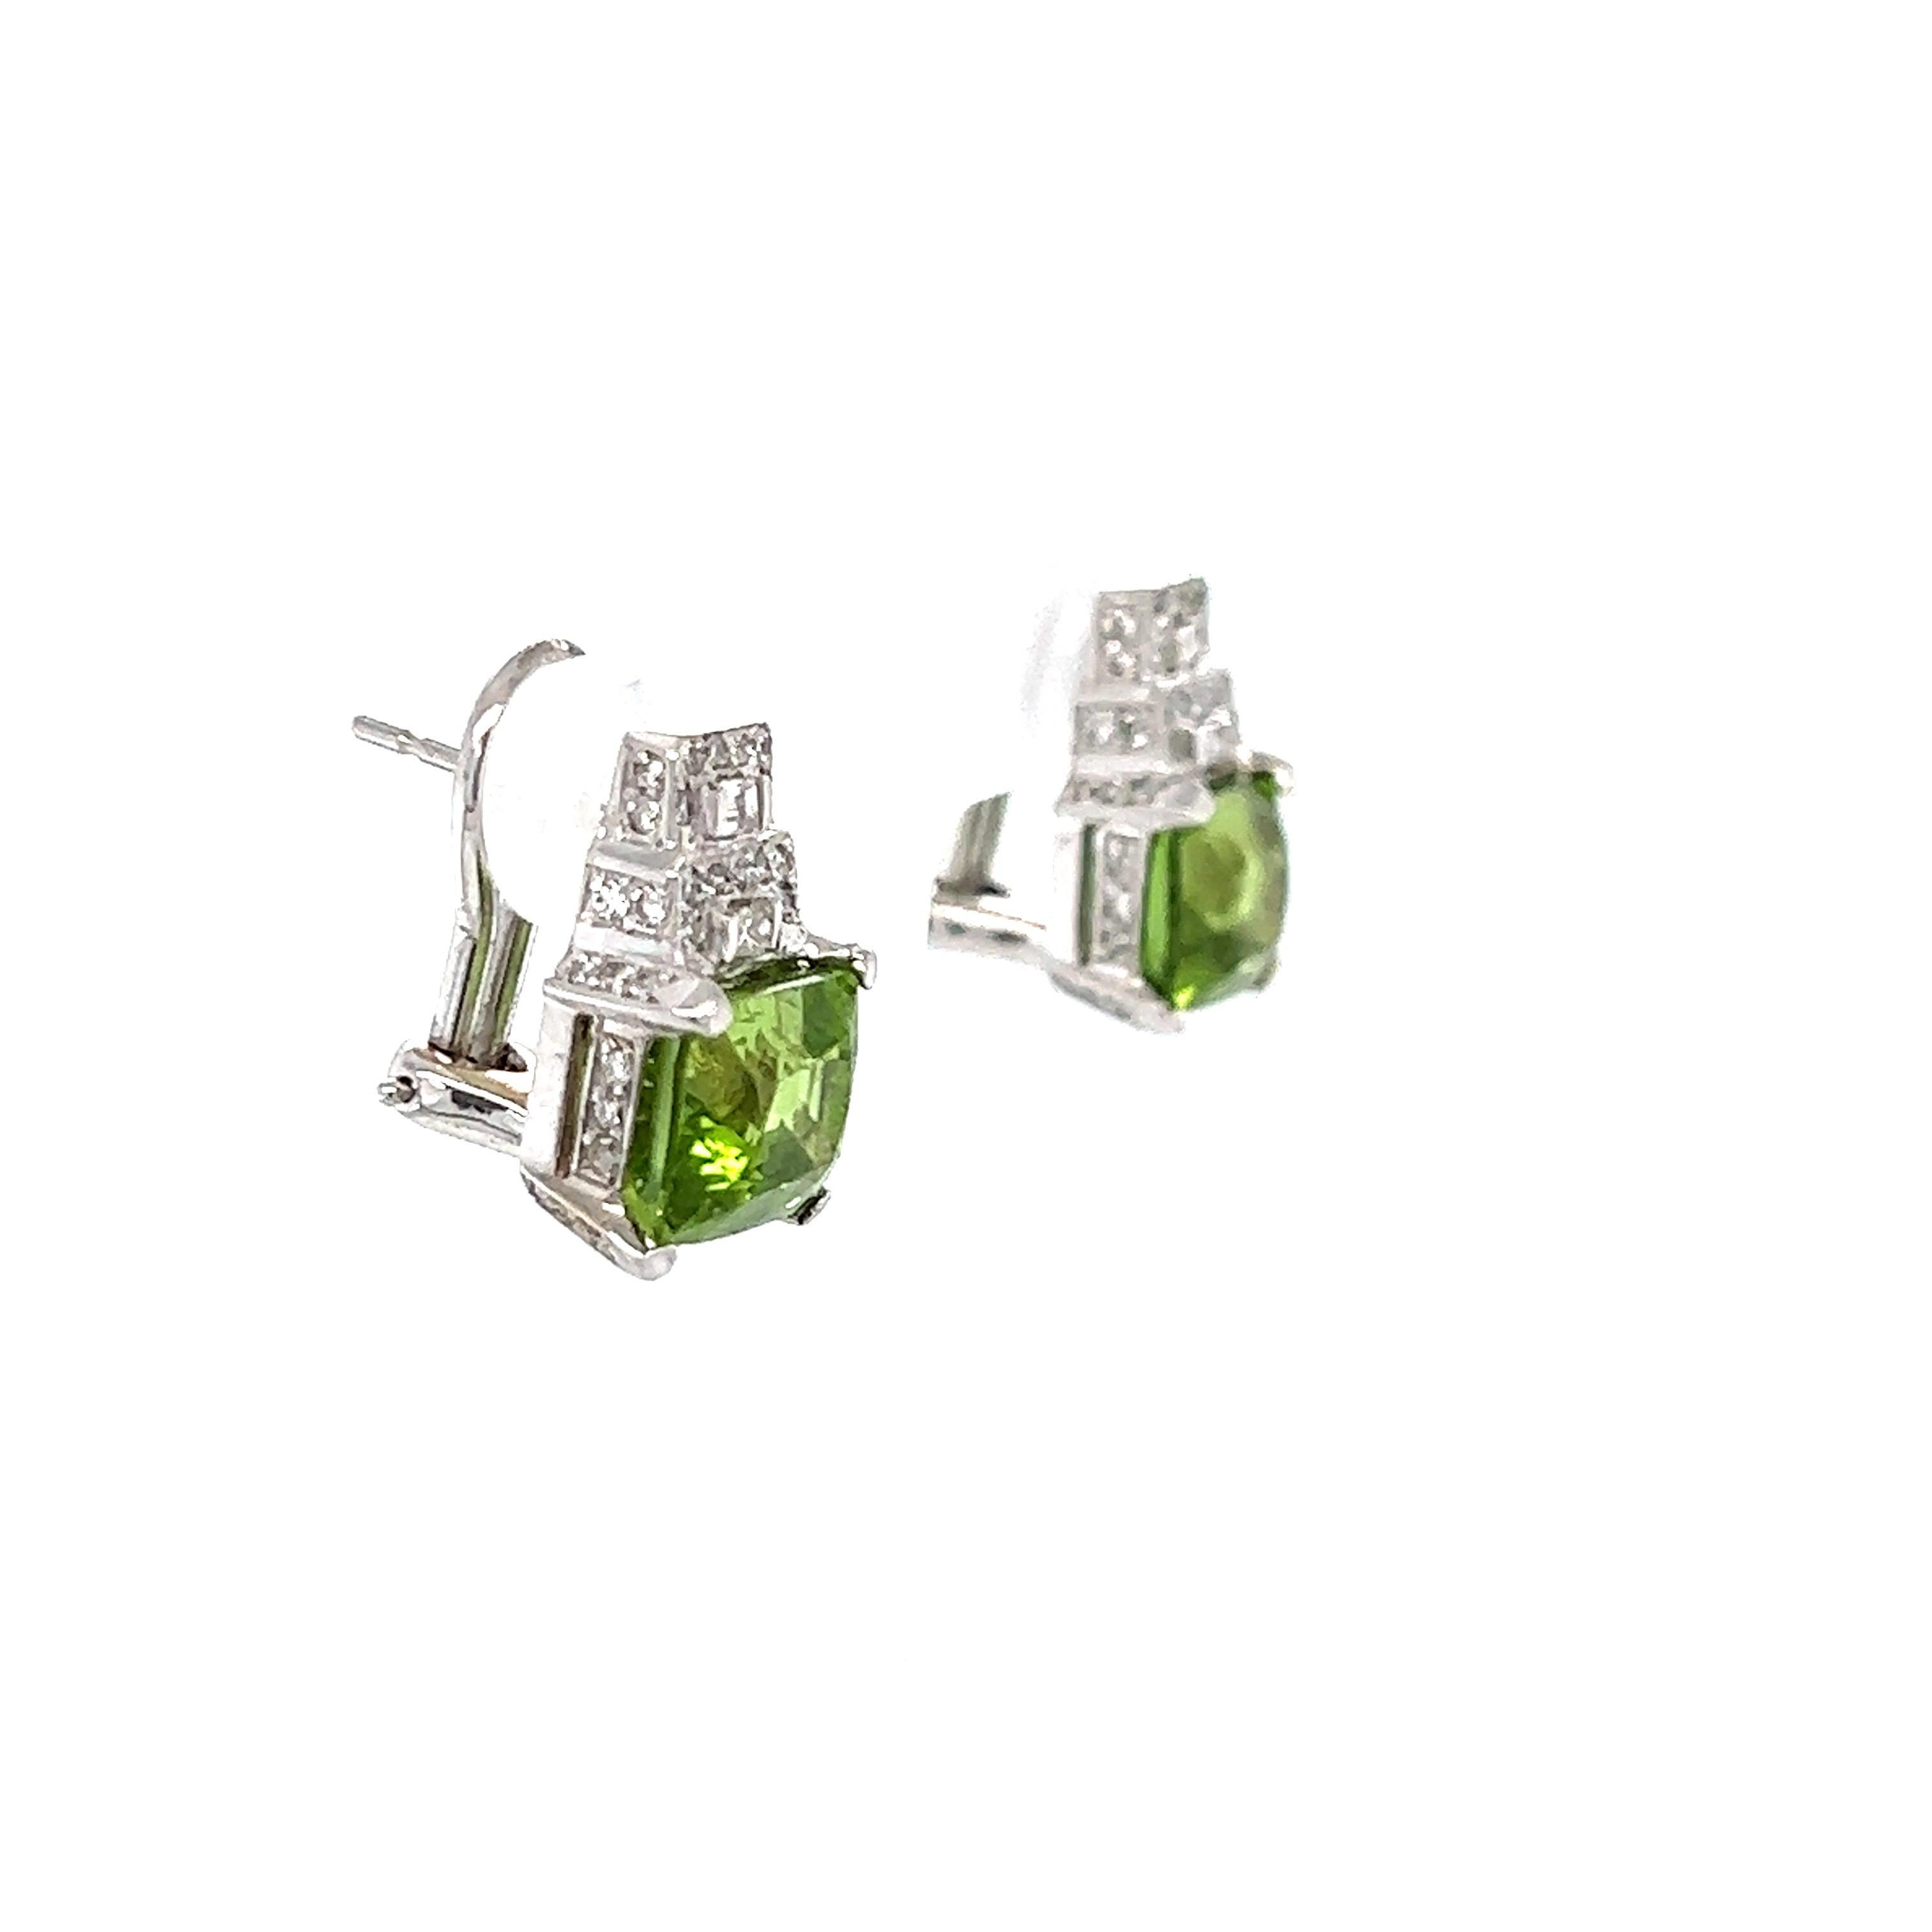 There are 2 Square Cushion Cut Peridots that weigh 7.70 carats and measure at 8 x 9 mm each. 

There are 78 Round Cut Diamonds that weigh 0.46 carats and 4 Baguette Cut Diamonds that weigh 0.15 carats. Clarity and Color of the Round Cut Diamonds are